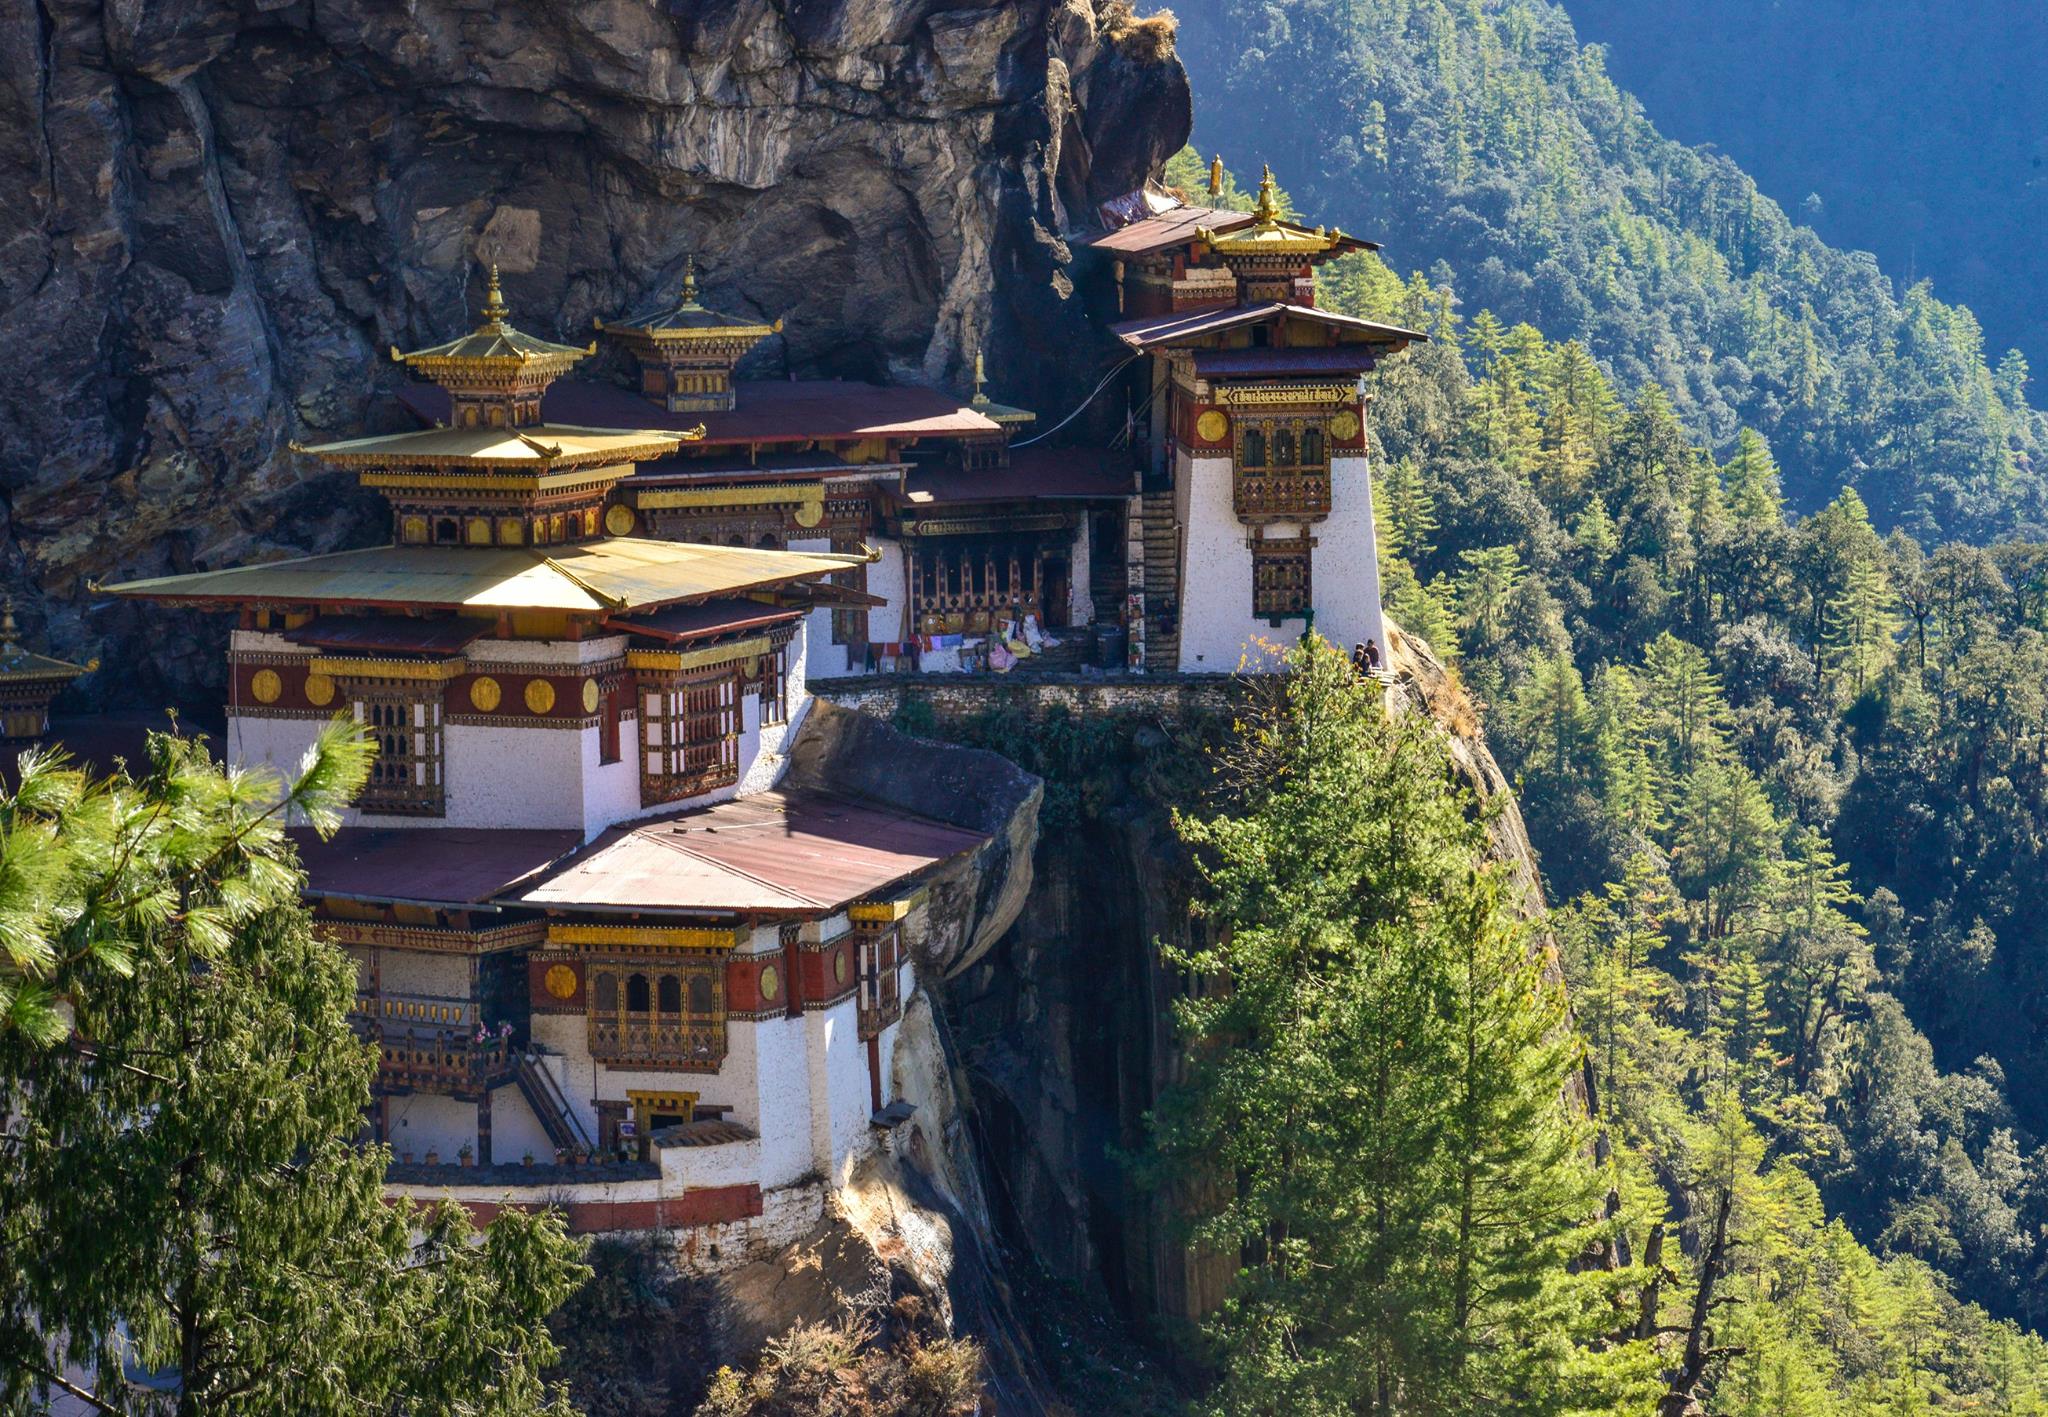 Nestled between two gigantic neighbors, the tiny kingdom of Bhutan is a majestic, serene, and breathtakingly beautiful hideaway high in the Himalayas. 